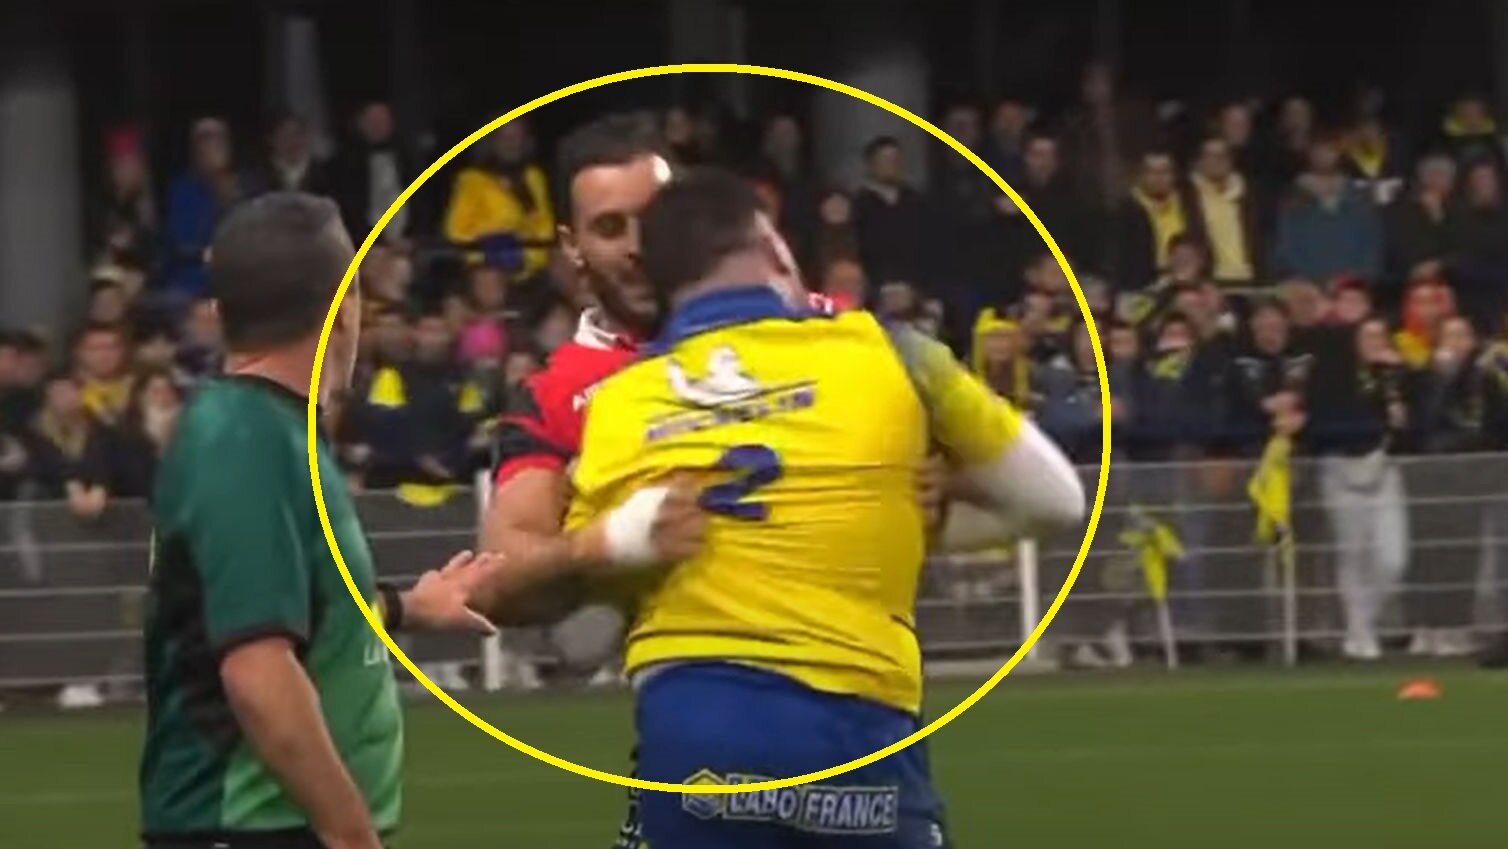 Everything we know about rugby literally turned on its head